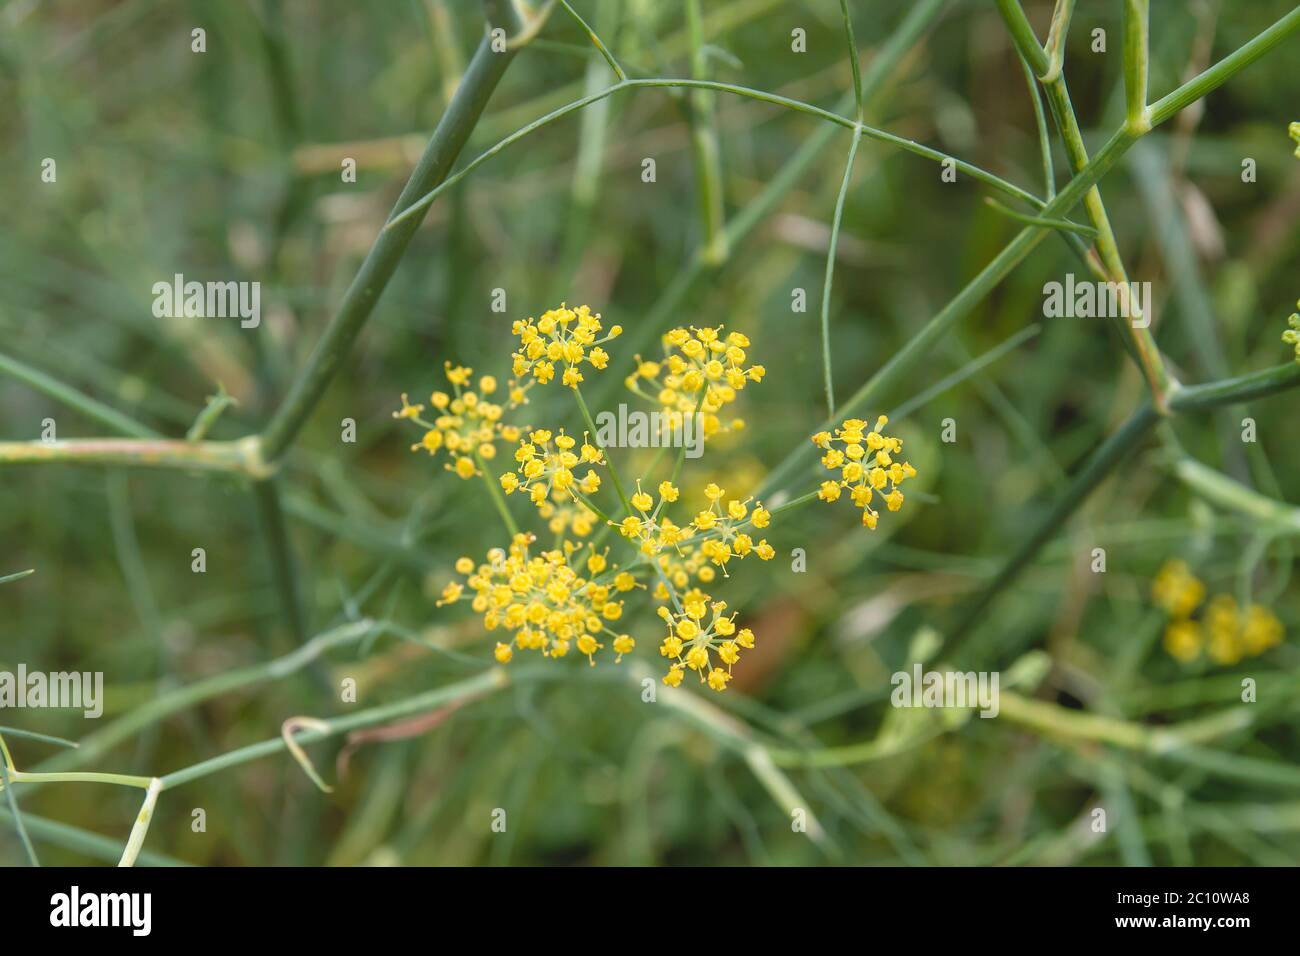 Anise plant yellow flowers blooming Stock Photo